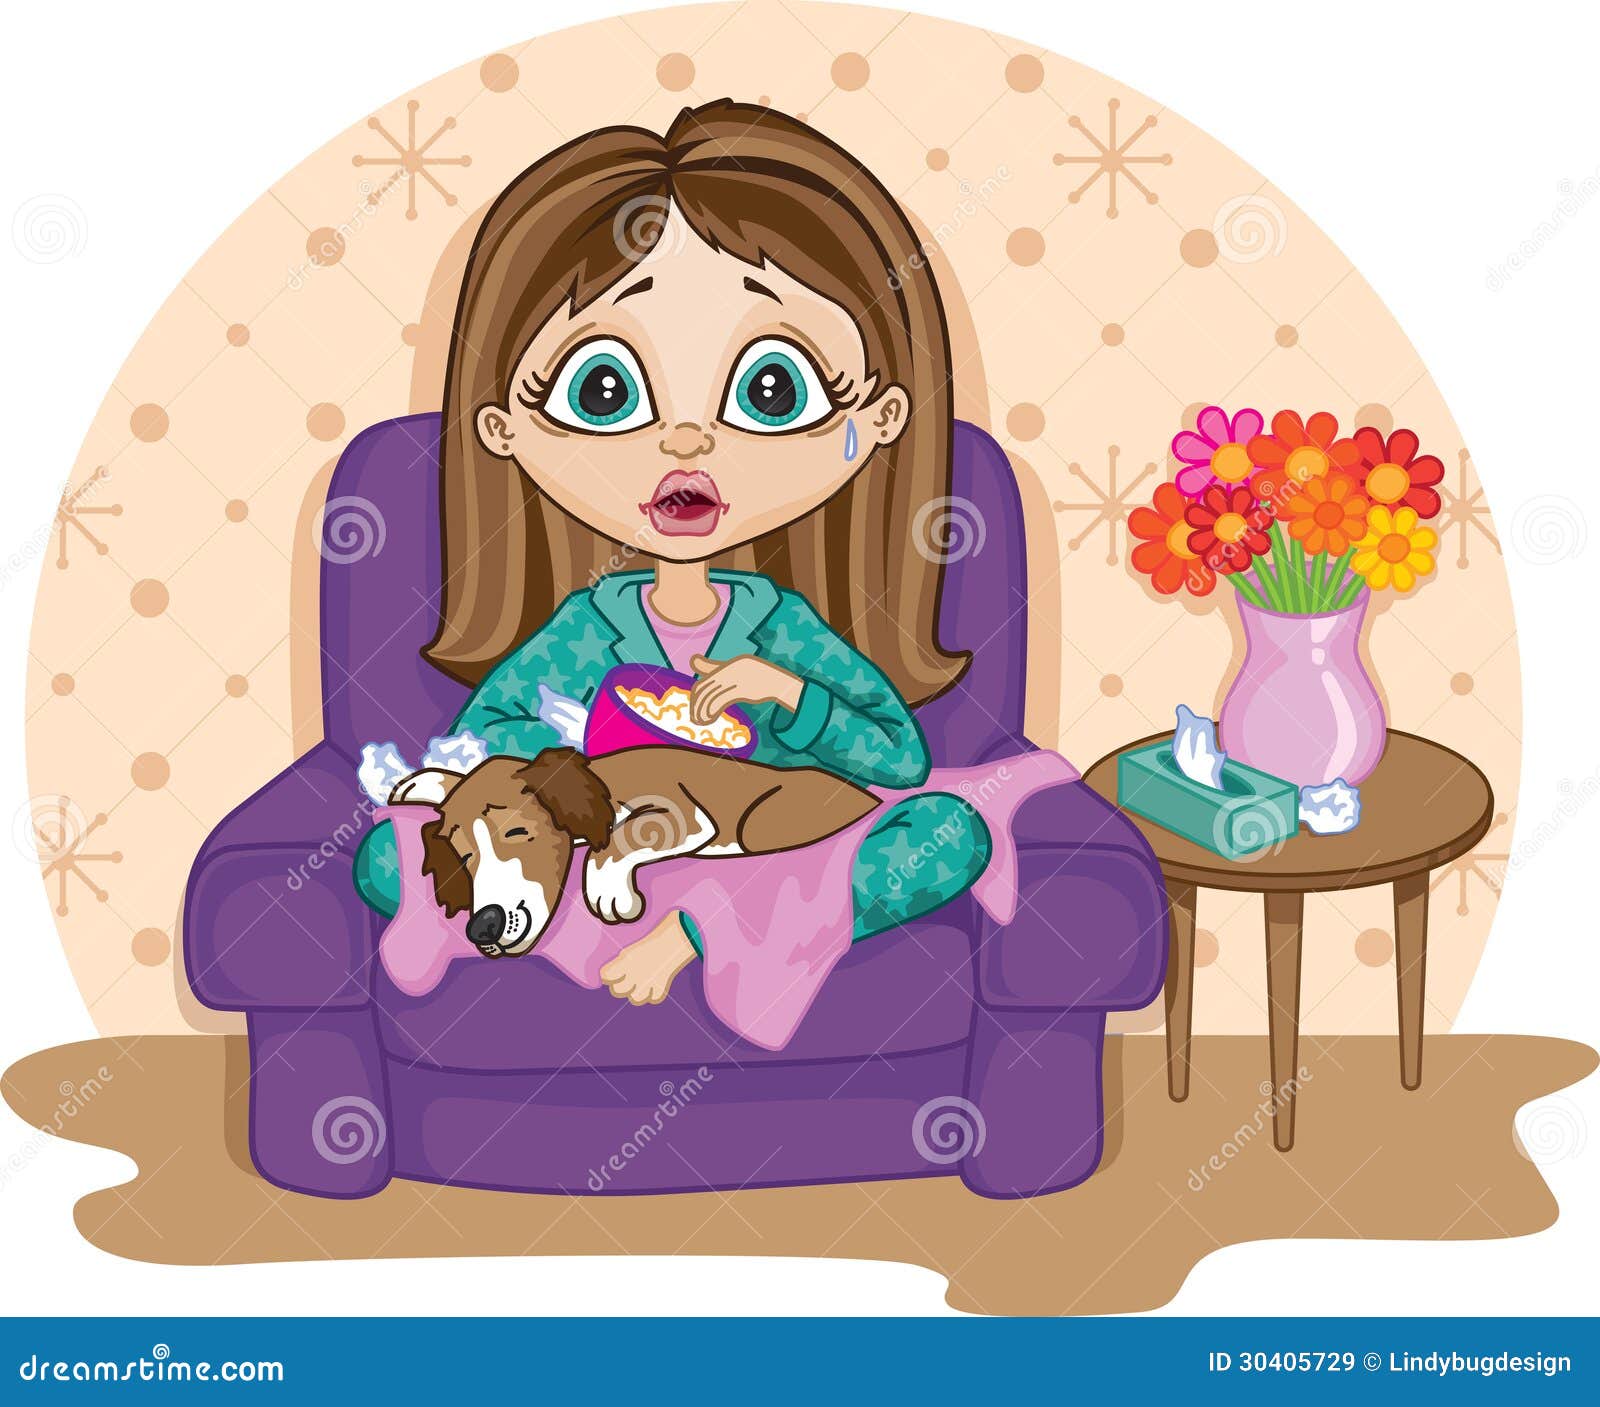 clipart watching movies - photo #30